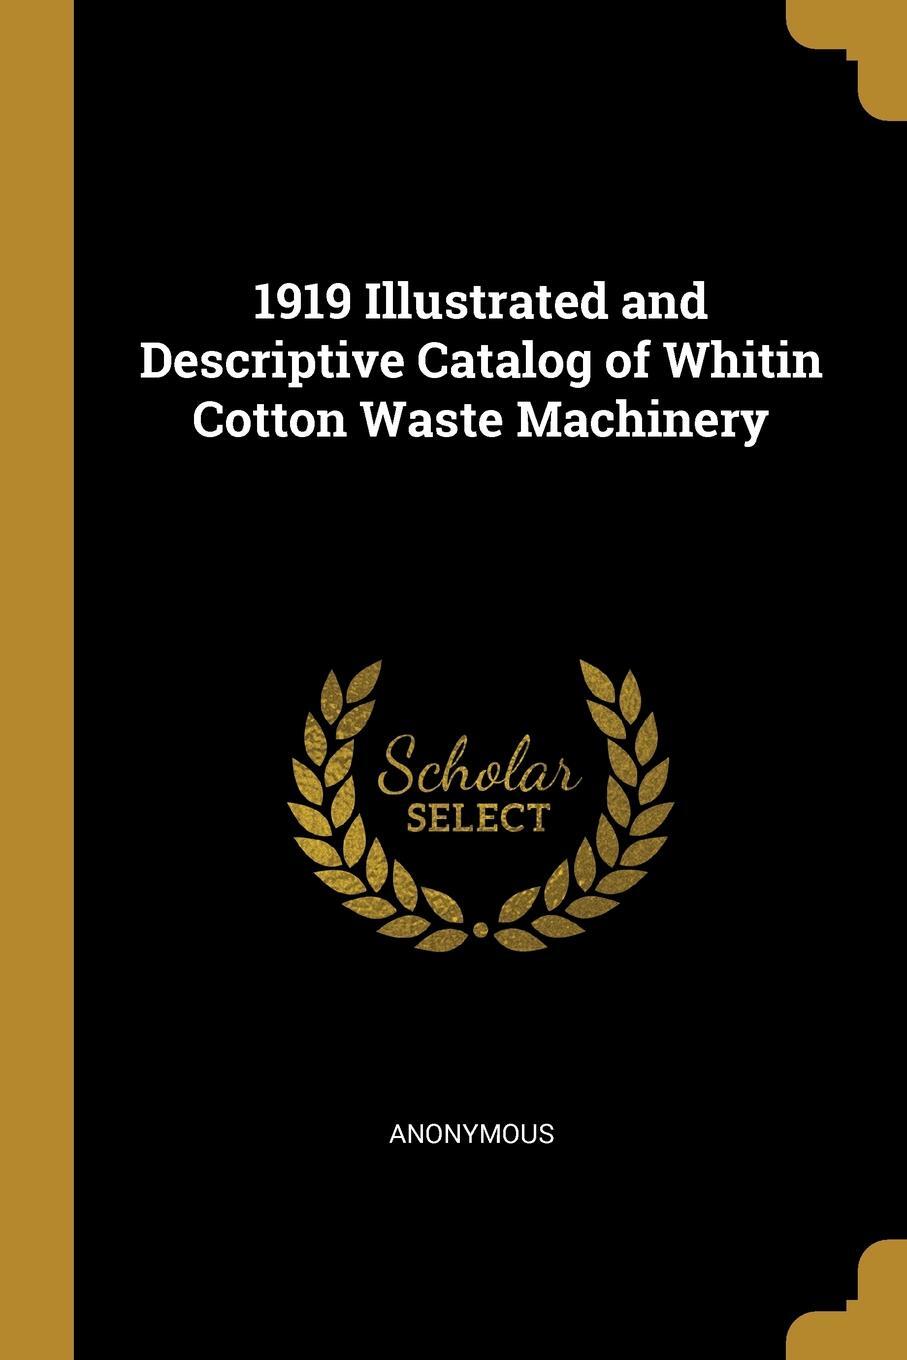 фото 1919 Illustrated and Descriptive Catalog of Whitin Cotton Waste Machinery